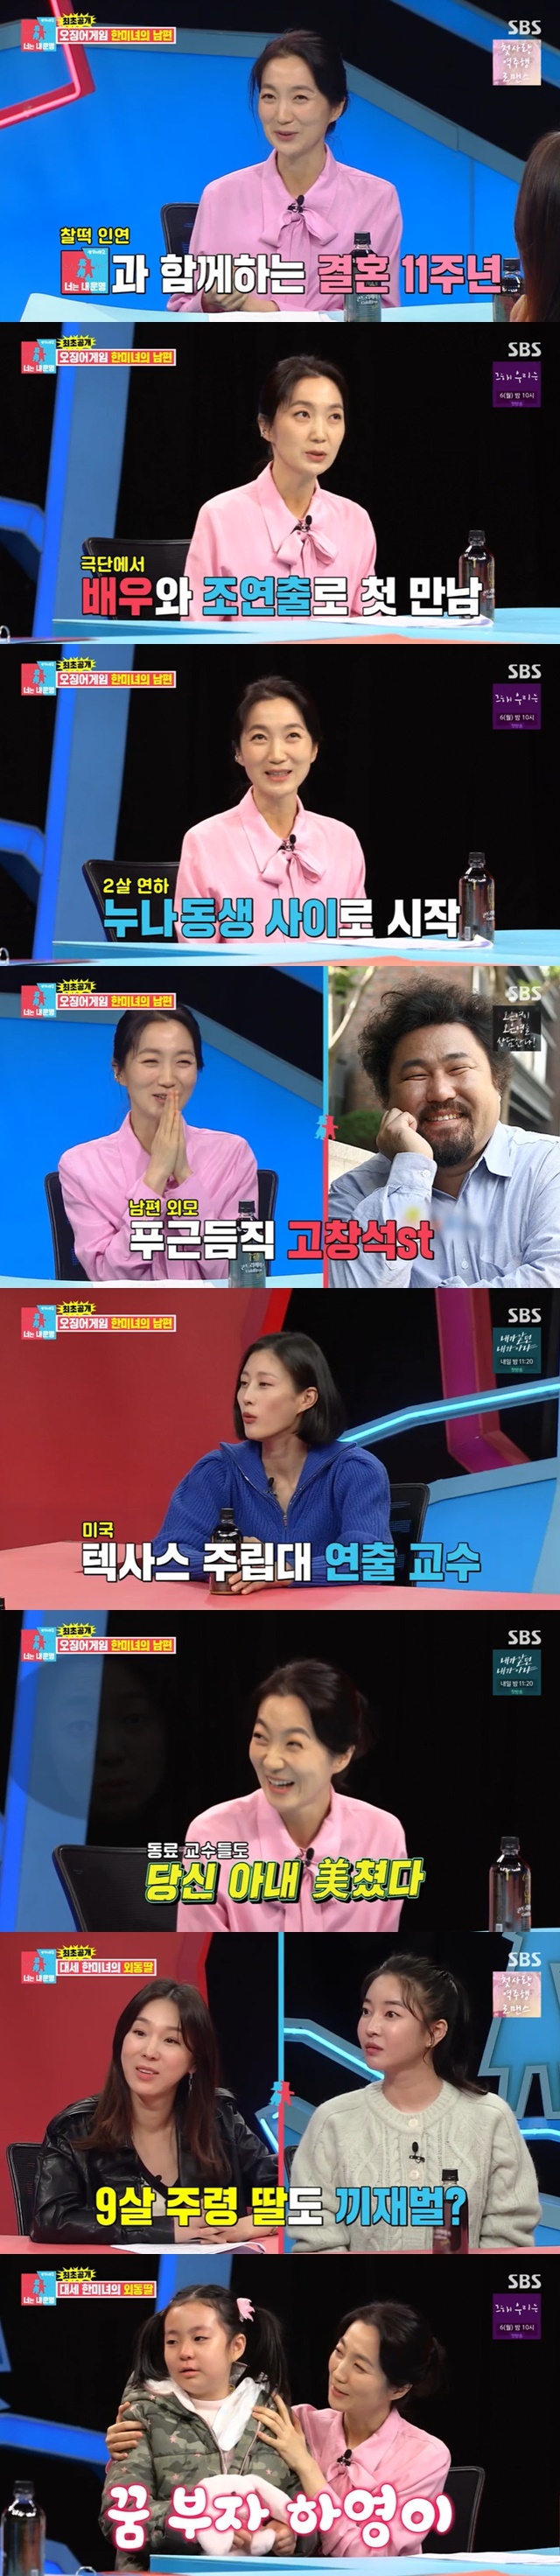 Squid Game Han Mi-nyeo, Kim Joo-ryeong, unveiled her two-year-old college professor Husband and nine-year-old daughter.SBS Same Bed, Different Dreams 2 Season 2 - You Are My Destiny on November 29 featured squid game Korean and American, and marriage 11-year-old actor Kim Joo-ryeong.On the day of the broadcast, Kim Joo-ryeong first met with United States of America University professor Husband as an assistant actor and actor at the theater. I was comfortable calling her sister, 2 years old, and I gave her a signal.Unlike what I saw, the mouthpiece was a love story, but the writing was so beautiful. It looked like a bear, like a bandit. Husband of Kim Joo-ryeong, who resembles actor Ko Chang-seok, is currently teaching directing at United States of America Texas State University.Kim Joo-ryeong said Husband is enjoying the popularity of the squid game, saying, My colleagues are crazy and they are crazy in a good sense.Kim Joo-ryeong said, Husband went to study abroad and I went there for a while and had a child there and had a three-year vacancy.Husband was gone. He was out of his way. He seemed to be exhausted. That was four, five years long.Husband was hired by the United States of America University, he said, when he was about to give up acting, he met a squid game.Husband was the one who kept the unknown. Kim Joo-ryeong said, Husband always tells me that he is a really good actor.It is not because I am a woman I love, but because I live together, but when I look objectively, I am a good actor.Especially, this time, the squid game is good, so it seems to be rewarded for the hardships that have been suffered. Kim Joo-ryeong also revealed her 9-year-old daughter who came with her.Kim Joo-ryeongs daughter wanted to sit on the set of Same Bed, Different Dreams 2: You Are My Dest because the dream group is a girl group.However, Kim Joo-ryeongs daughter, who appeared in the studio, showed tears and said, I have a lot of dreams. However, Kim Sook asked, What is the comedian?Lee Ji-hye praised Kim Joo-ryeongs daughter for saying, I pick the quantity well.Kim Joo-ryeong also confessed to the behind-the-scenes footage of the squid game.Kim Joo-ryeong said, I thought it was the first time I had a big project, so I should not be disturbed.I had a drink of soju that I couldnt drink because I was so nervous, and I was so nervous about it that the director praised me for being so good, he said.Husbands crush on Kim Joo-ryeong is also a drink. Kim Joo-ryeong said, Im not good at drinking.Husband was against this, and she was a little bit like a douchebag, she said, and she liked it too much.I think it would be fun to live with a woman like this, not because she marriages, but because she was disappointed, Husband said.Husband gave me three-times for Kim Joo-ryeong when I was studying at United States of America.Kim Joo-ryeong said, I want to eat Korean food when I am pregnant, but I can not cook and I am an international student.I told Husband because I wanted to eat so much, and he made it all. I did all of them.I even breastfeededed, but I have to eat seaweed soup, but I have breastfeeded for a year and boiled seaweed soup every time I fall.